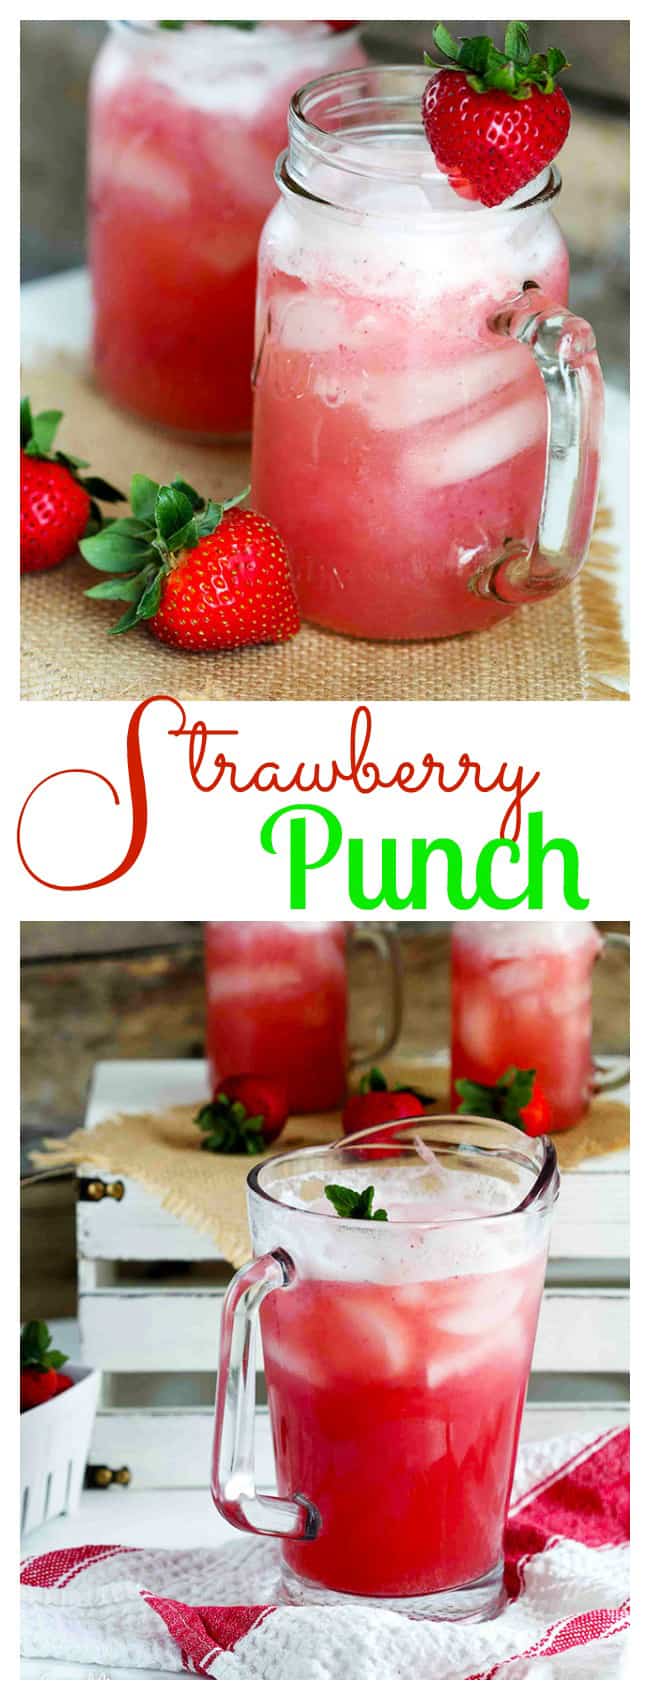 Strawberry Punch two-photo collage with text